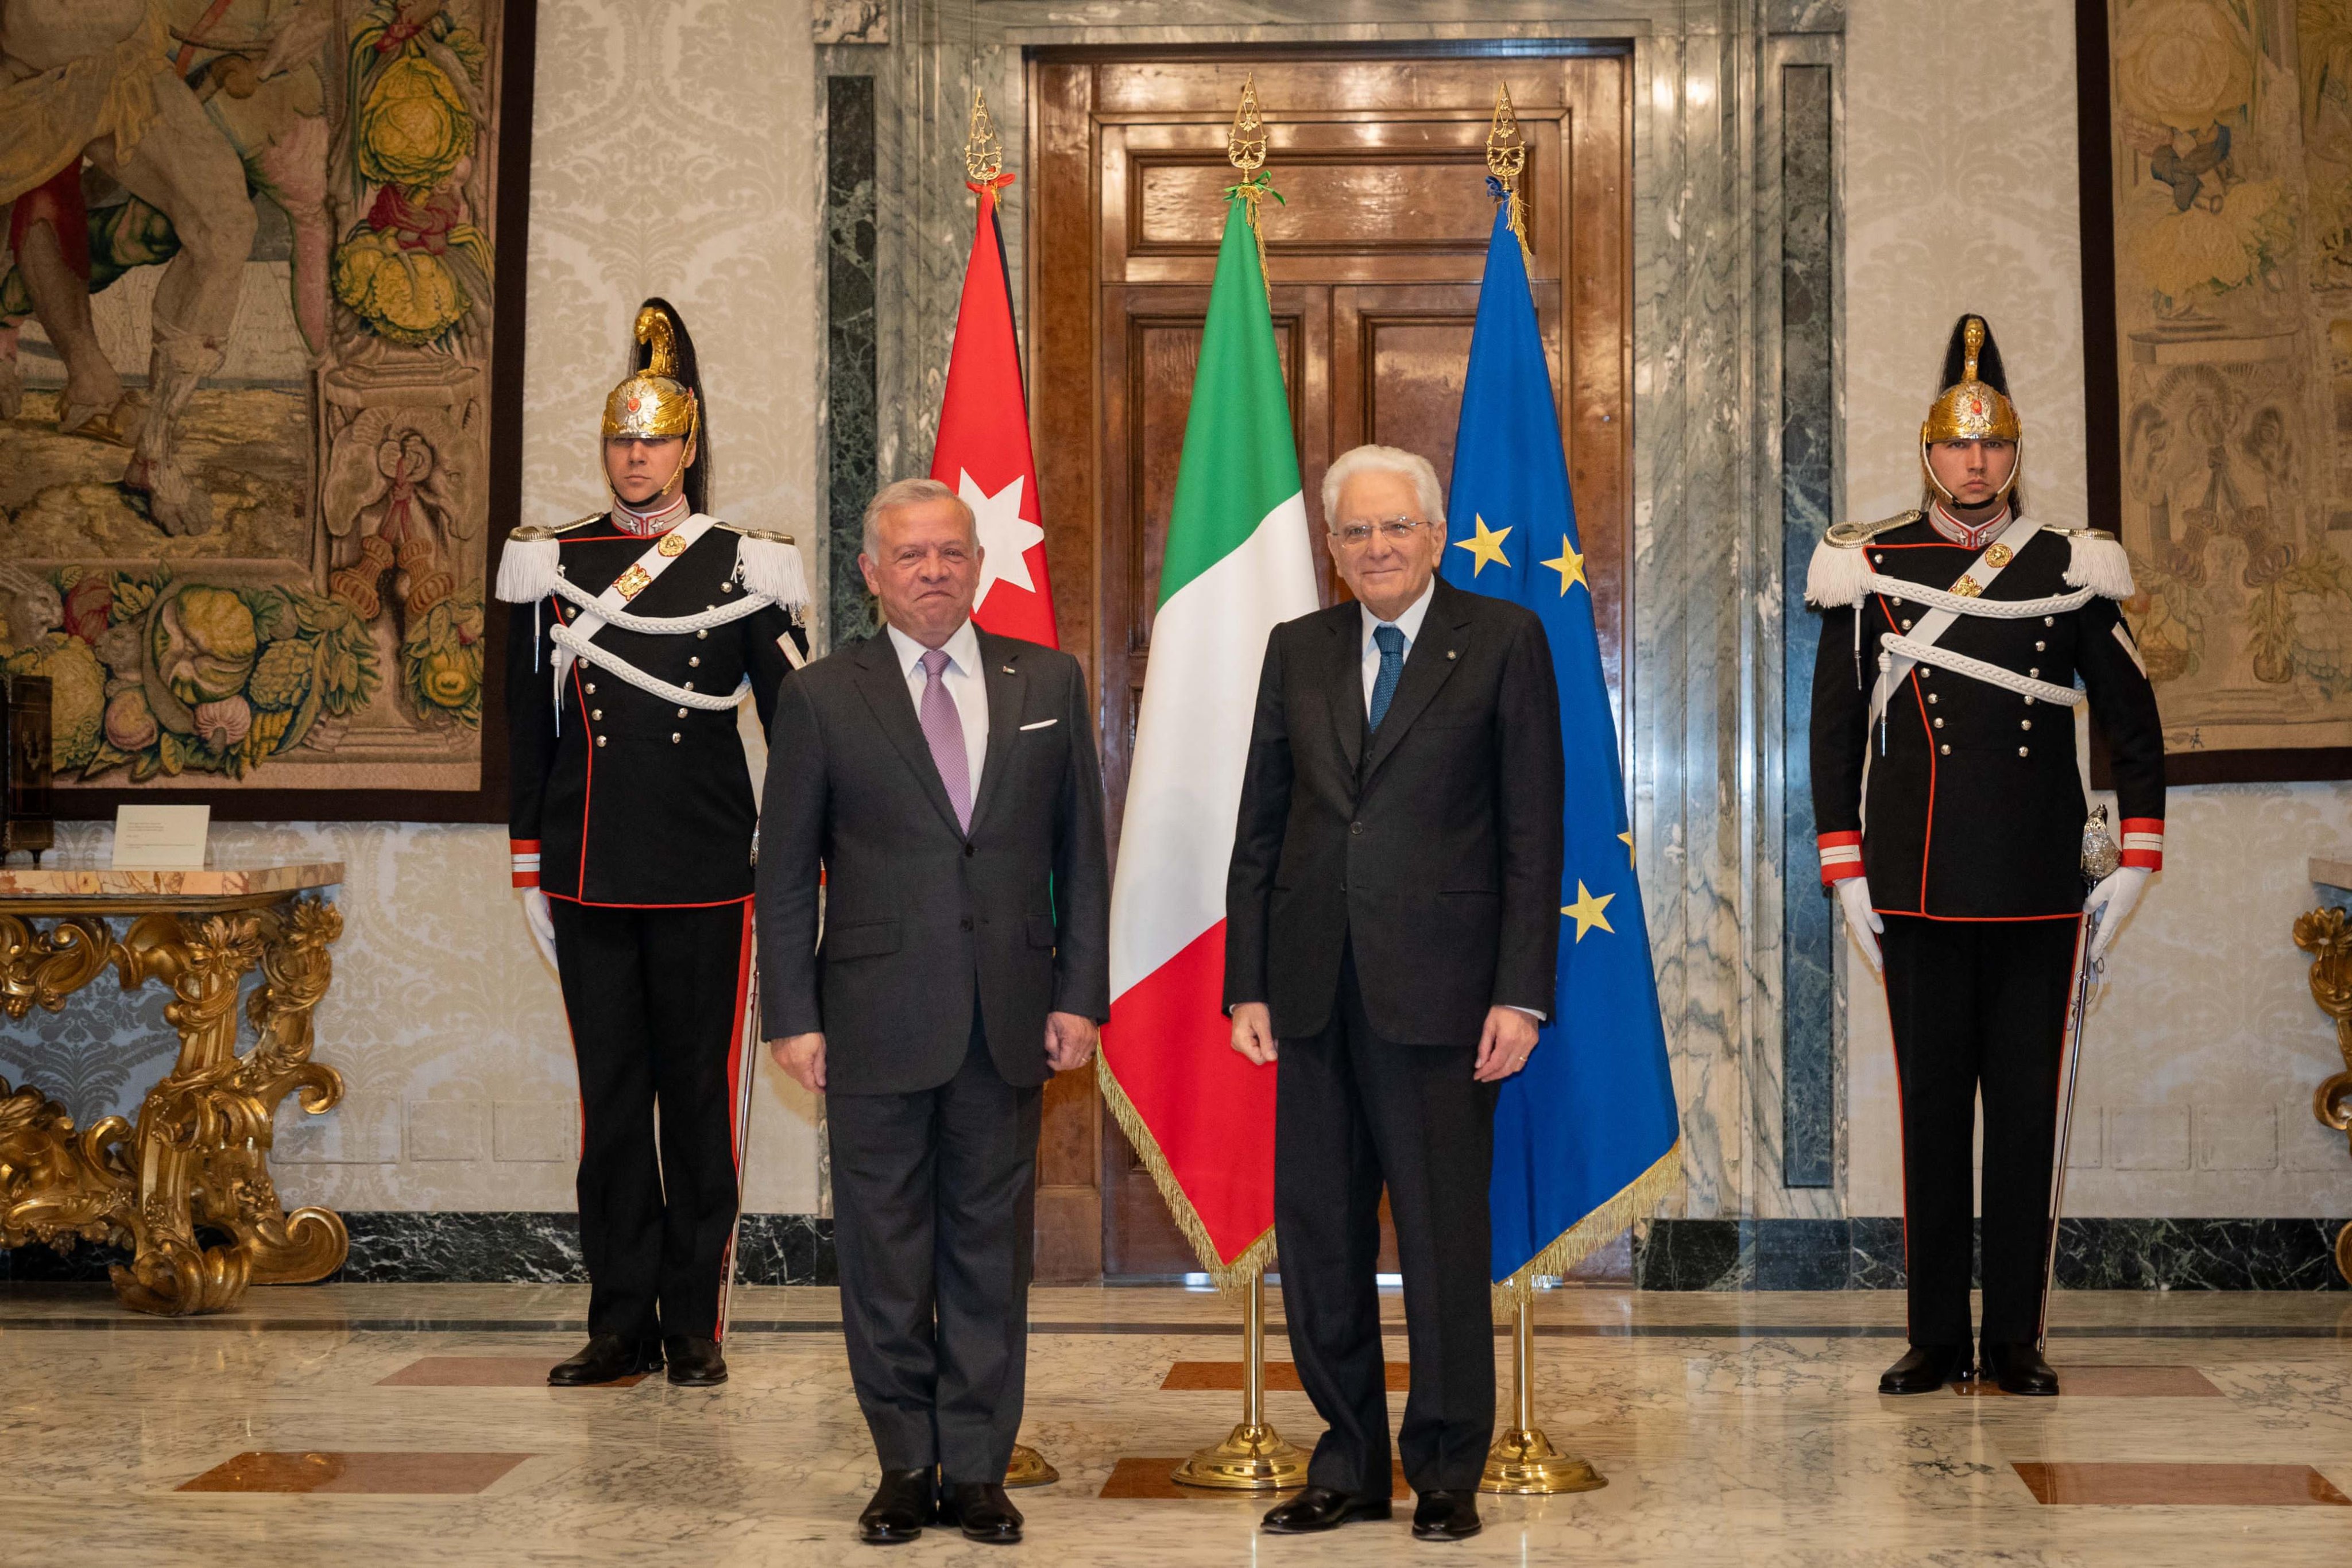 King meets Italy president, calls for ending humanitarian catastrophe in Gaza